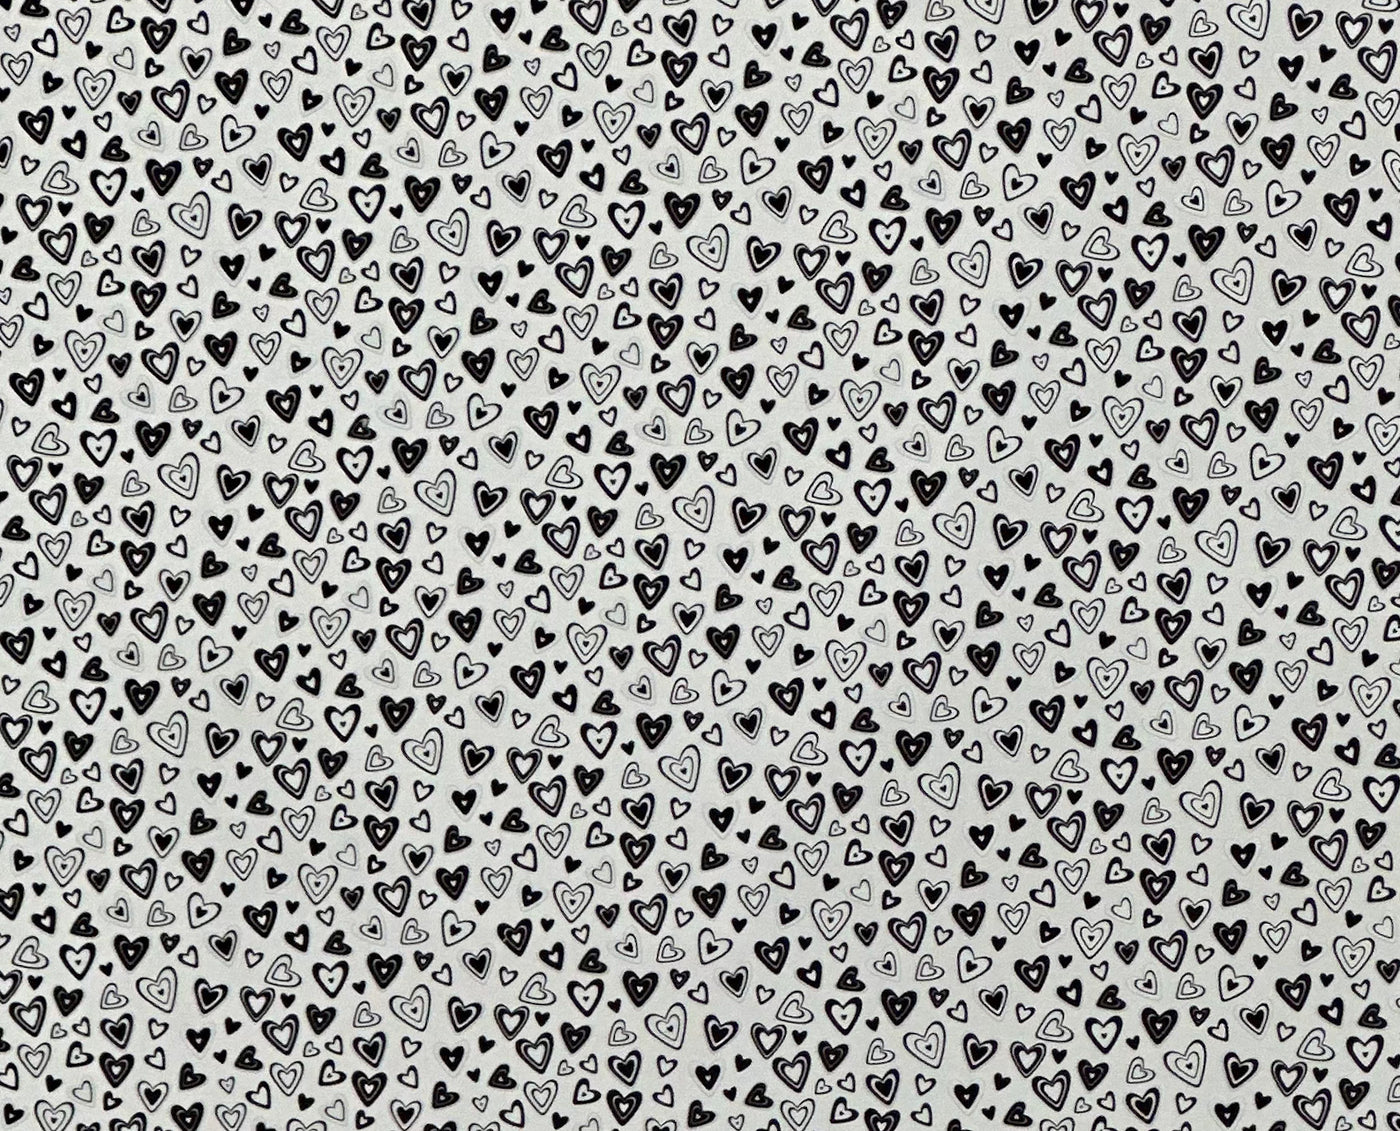 PatternPly® Scattered Micro Black and White Hearts